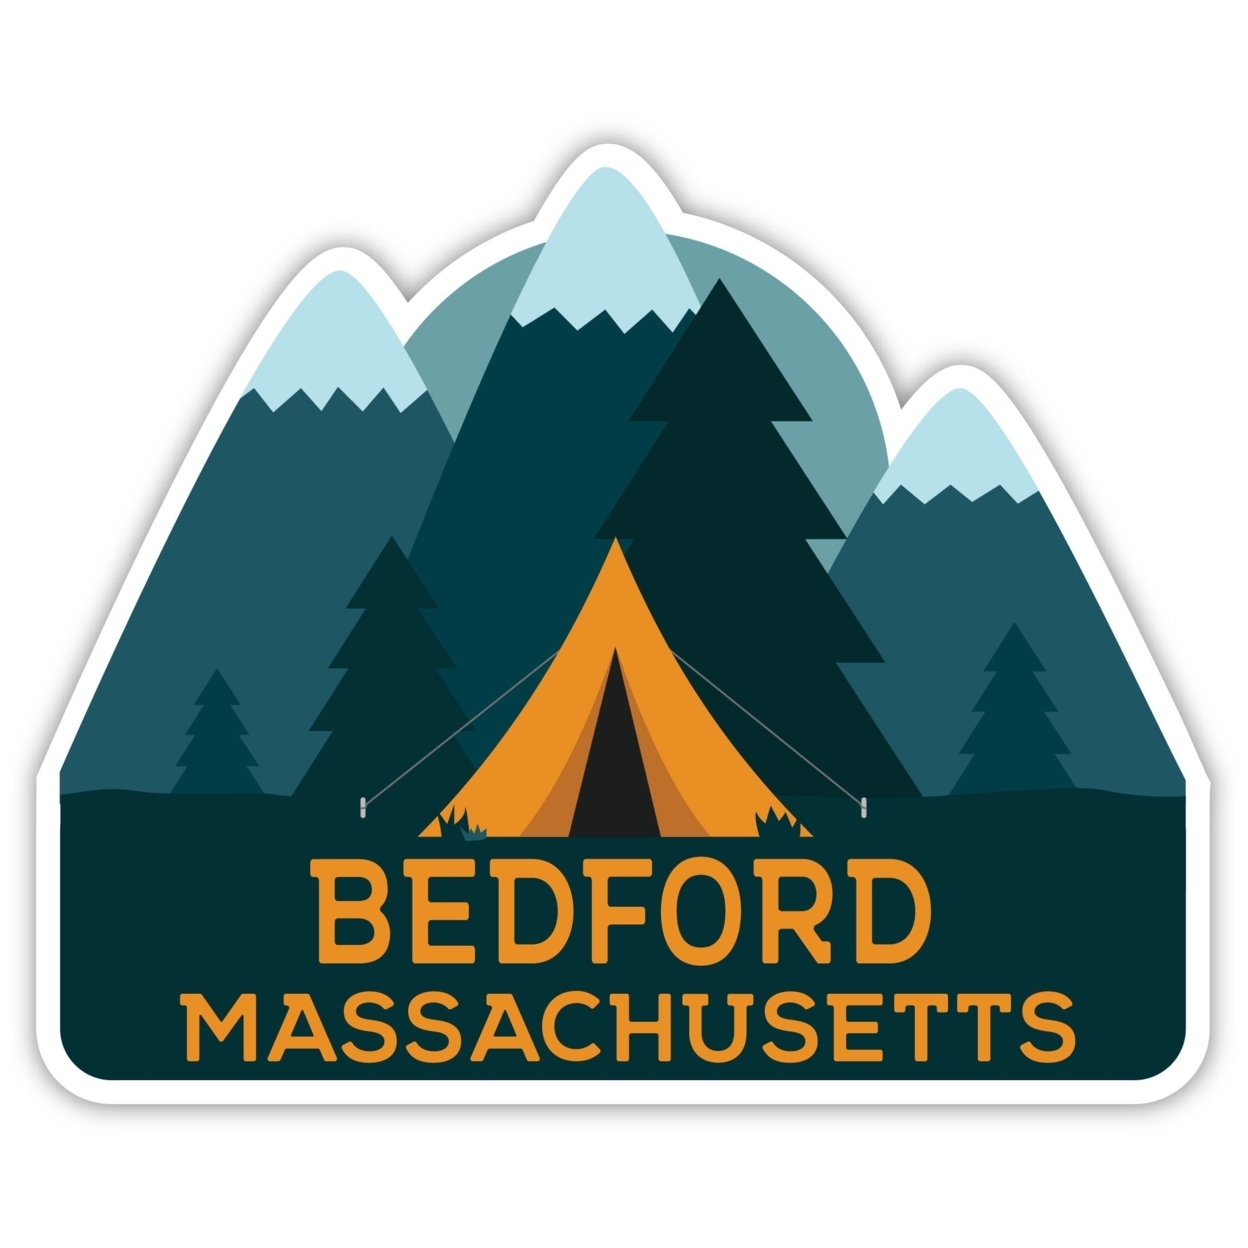 Bedford Massachusetts Souvenir Decorative Stickers (Choose Theme And Size) - 4-Pack, 6-Inch, Tent